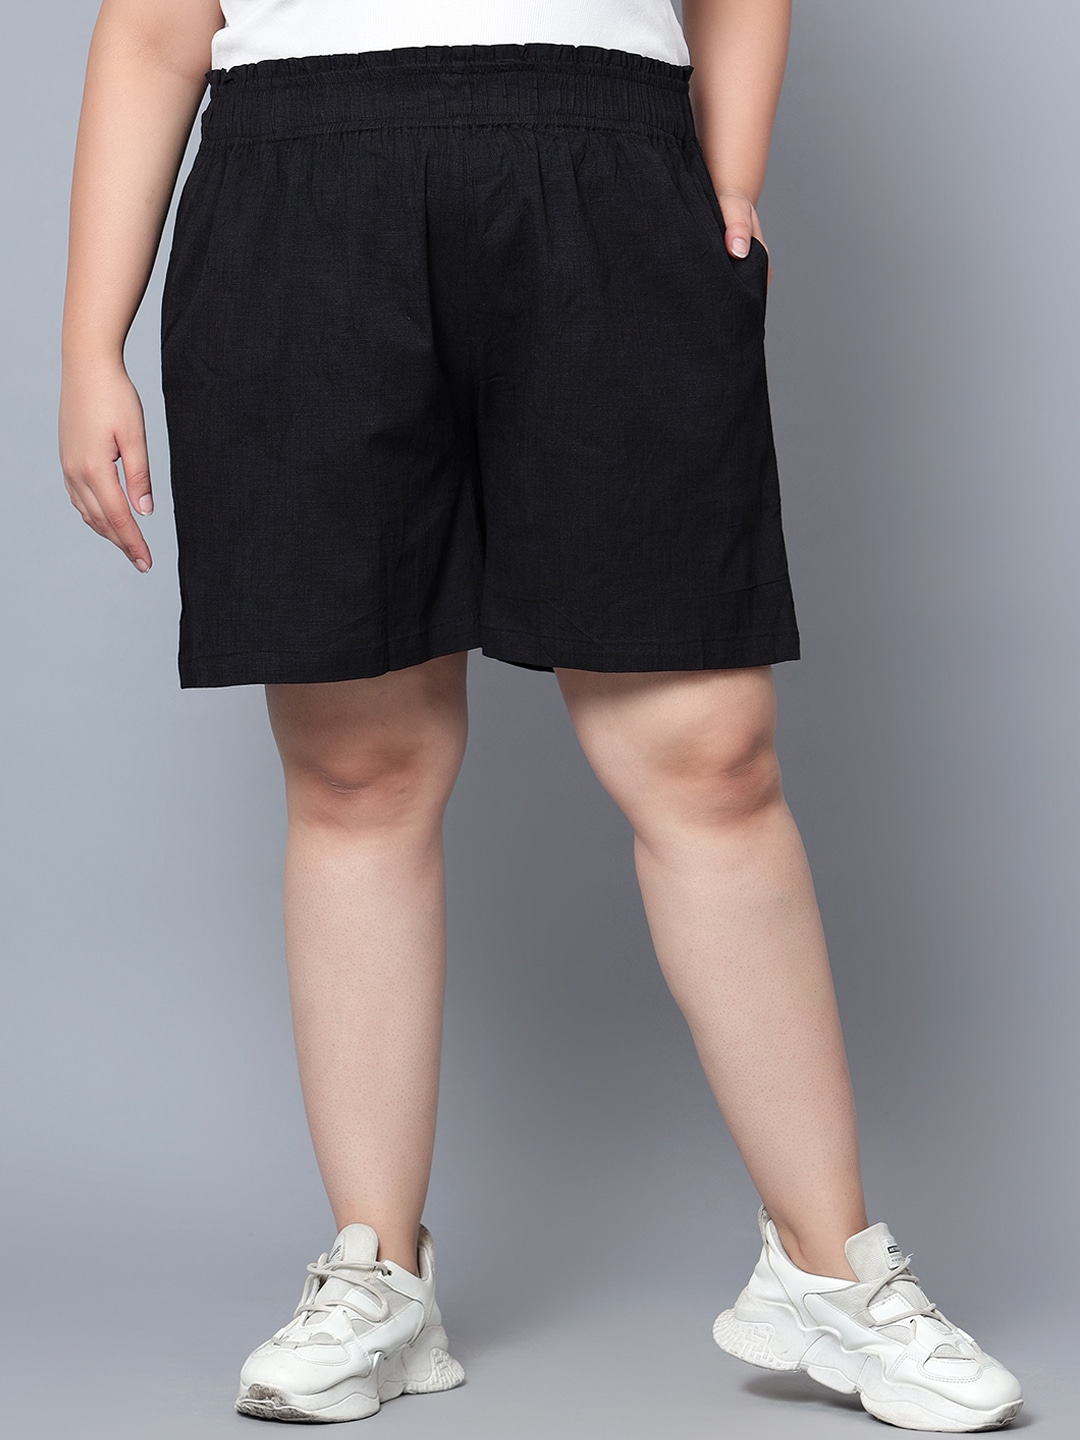 Indietoga Women High-Rise Shorts Price in India